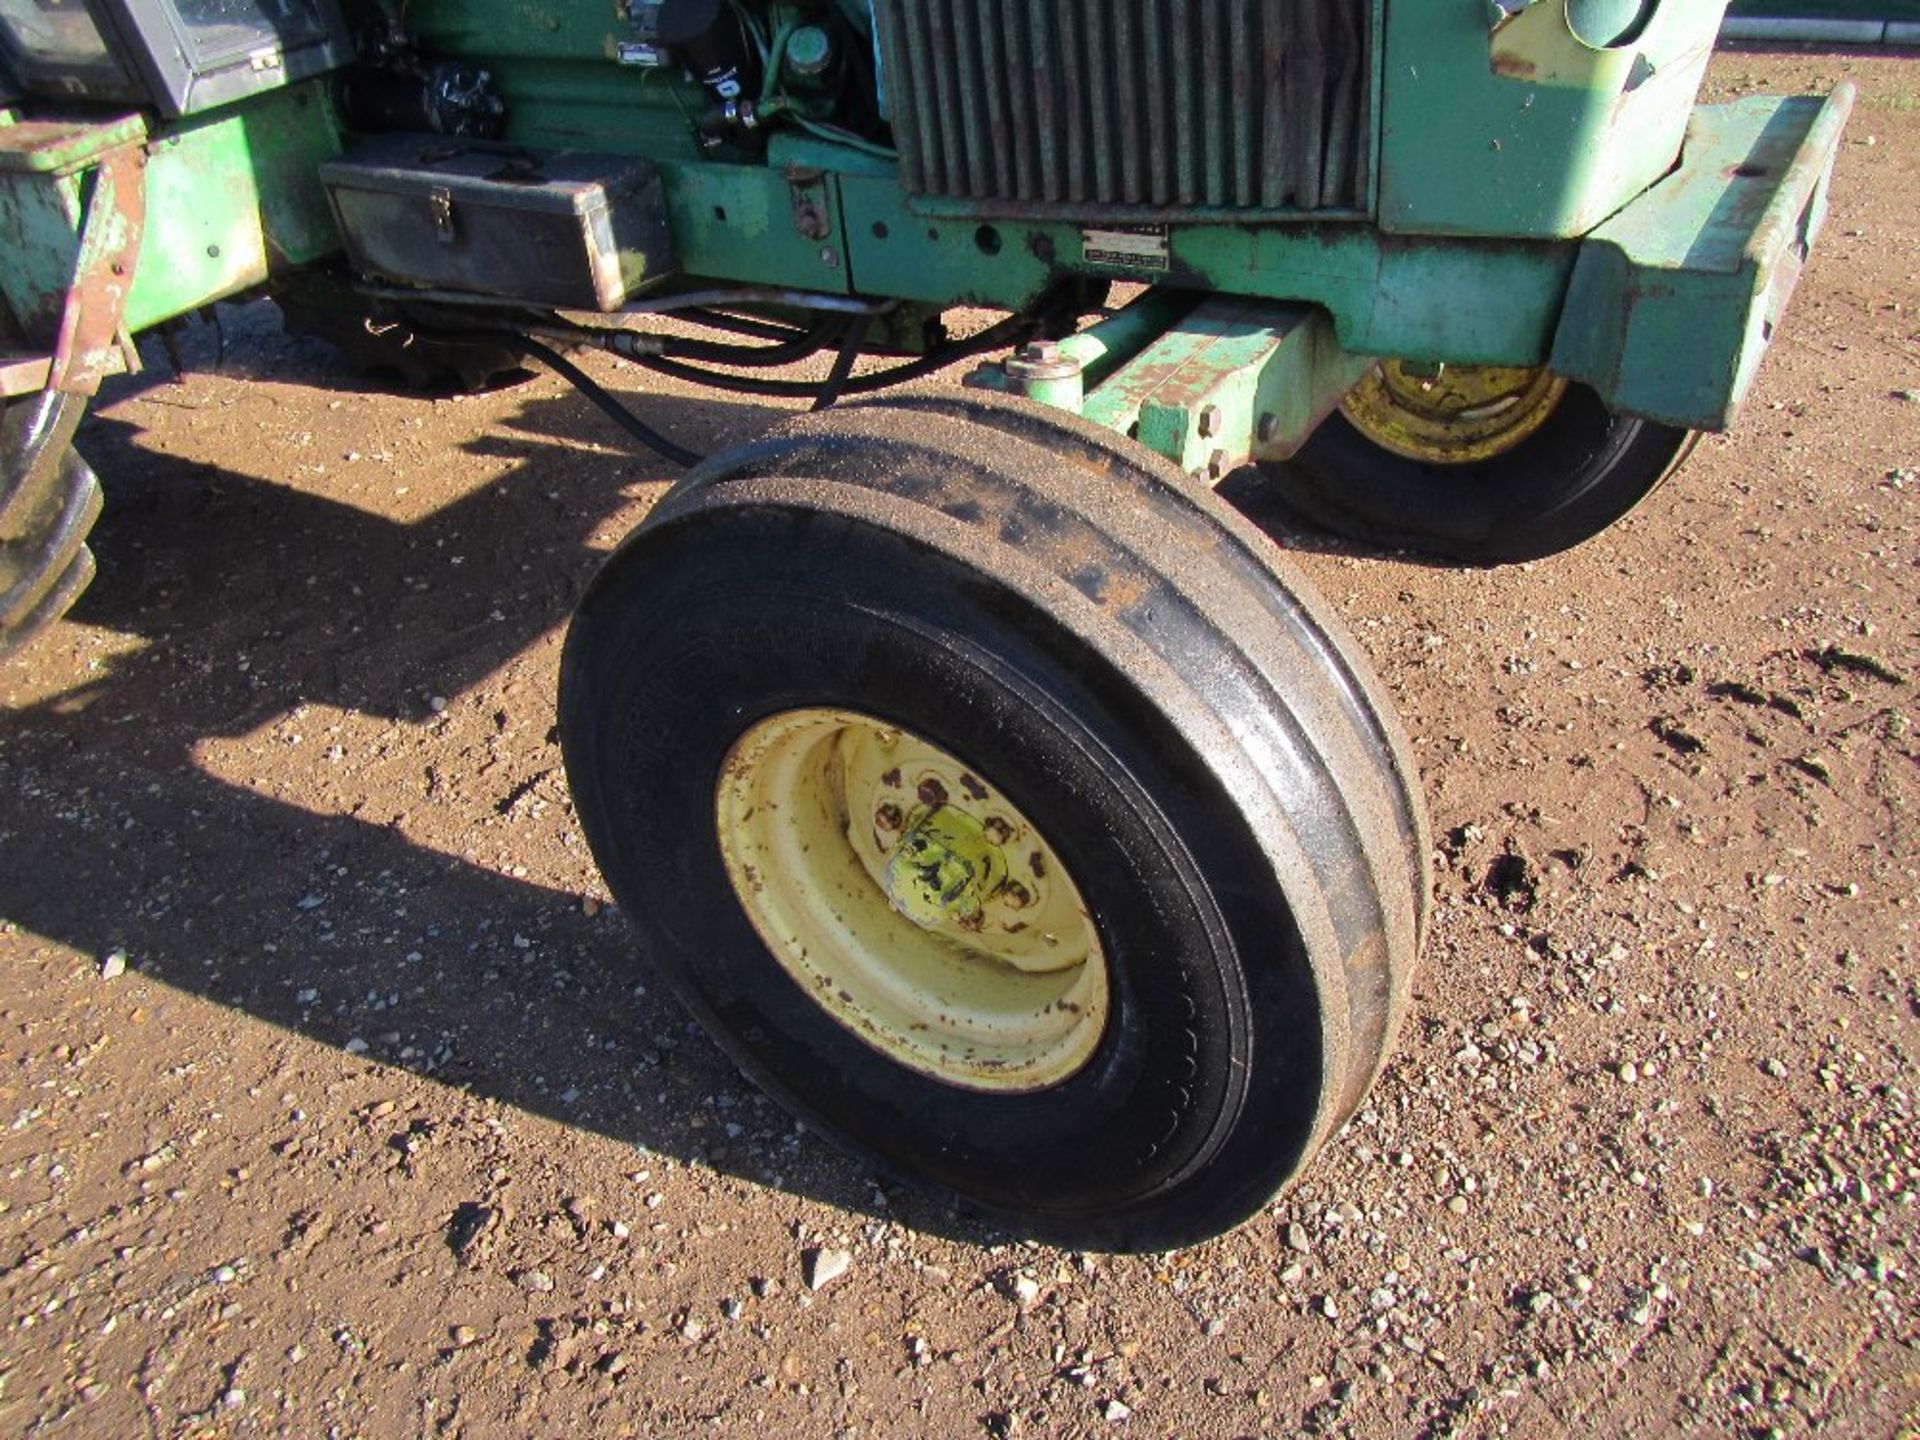 John Deere 3040 2wd Tractor with OPU Cab Reg. No. TFM 461V Ser No 364600 UNRESERVED LOT - Image 4 of 16